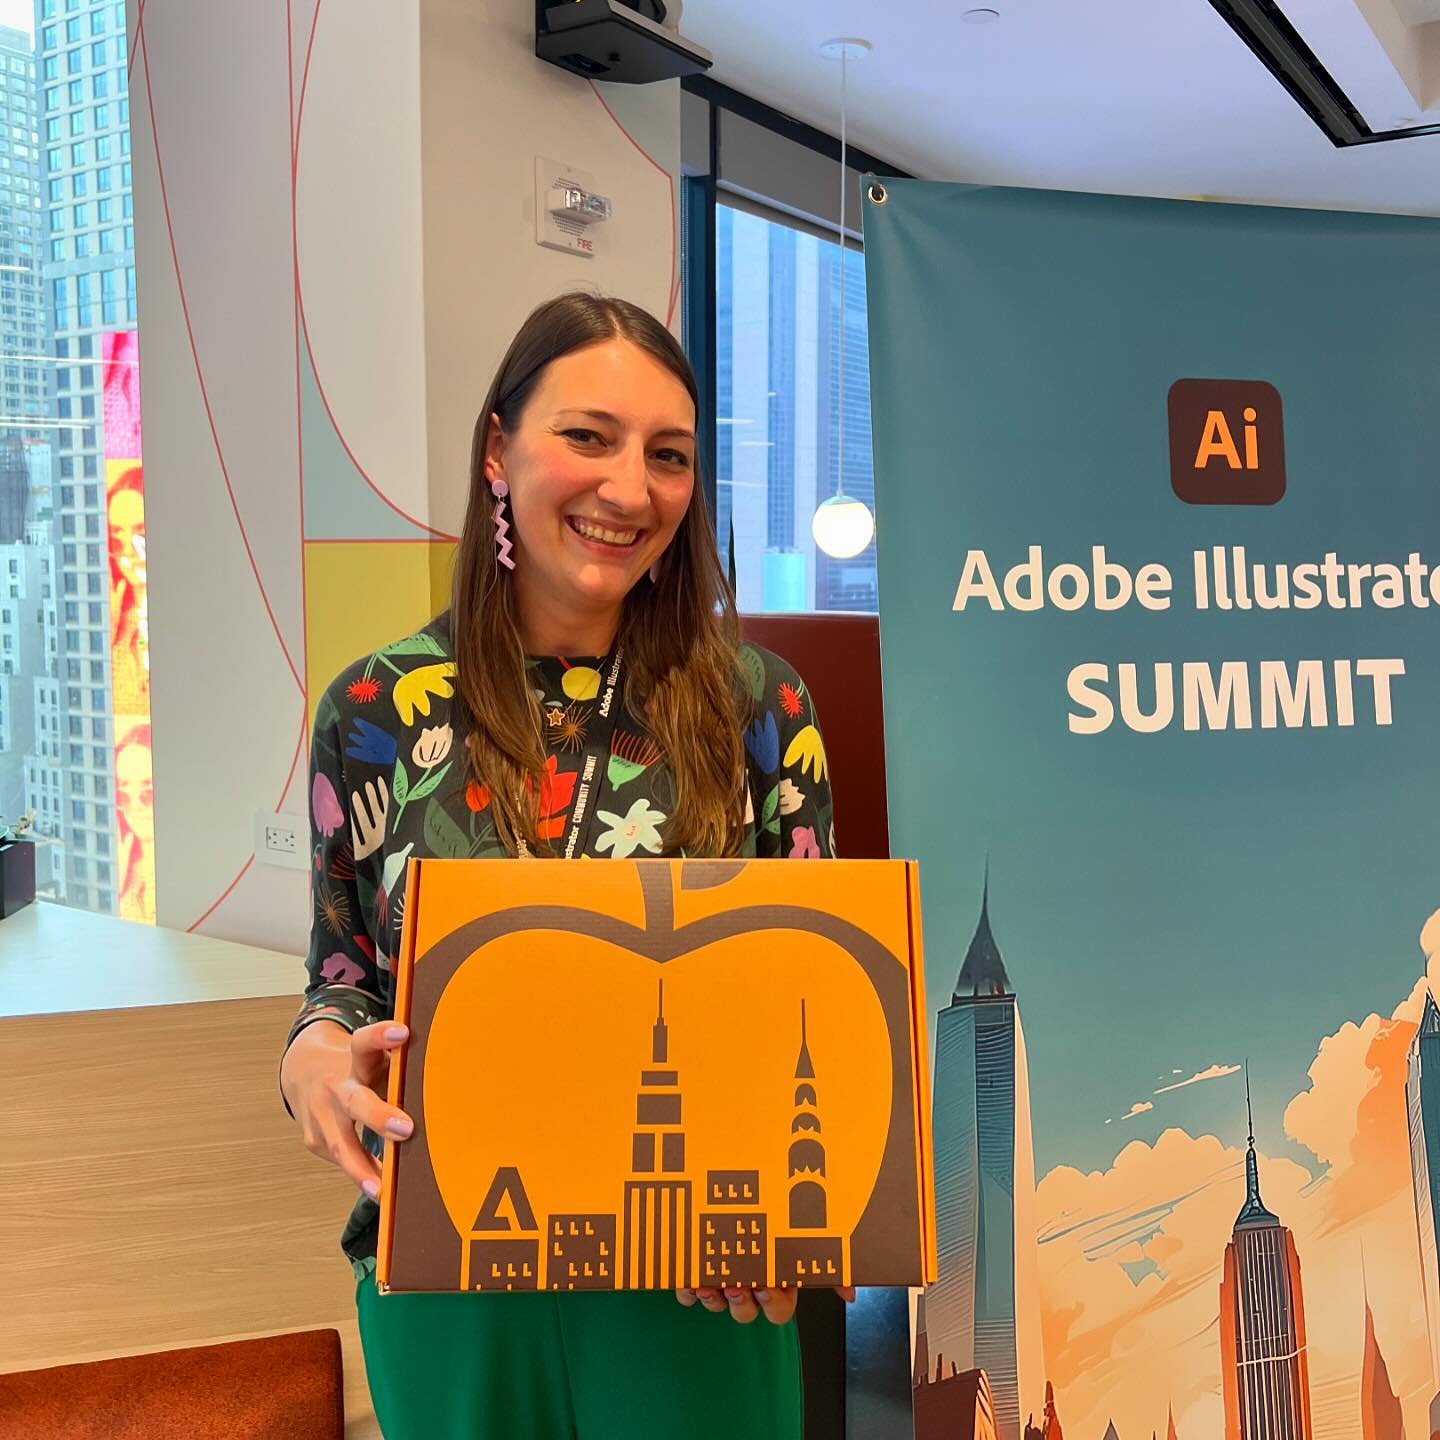 I&rsquo;m beyond honored and grateful that @adobe brought me and some of the most crazy talented designers and illustrators to NYC for the very first Adobe Illustrator Community Summit in their Times Square office ❤️😍

It was truly the most ✨magical